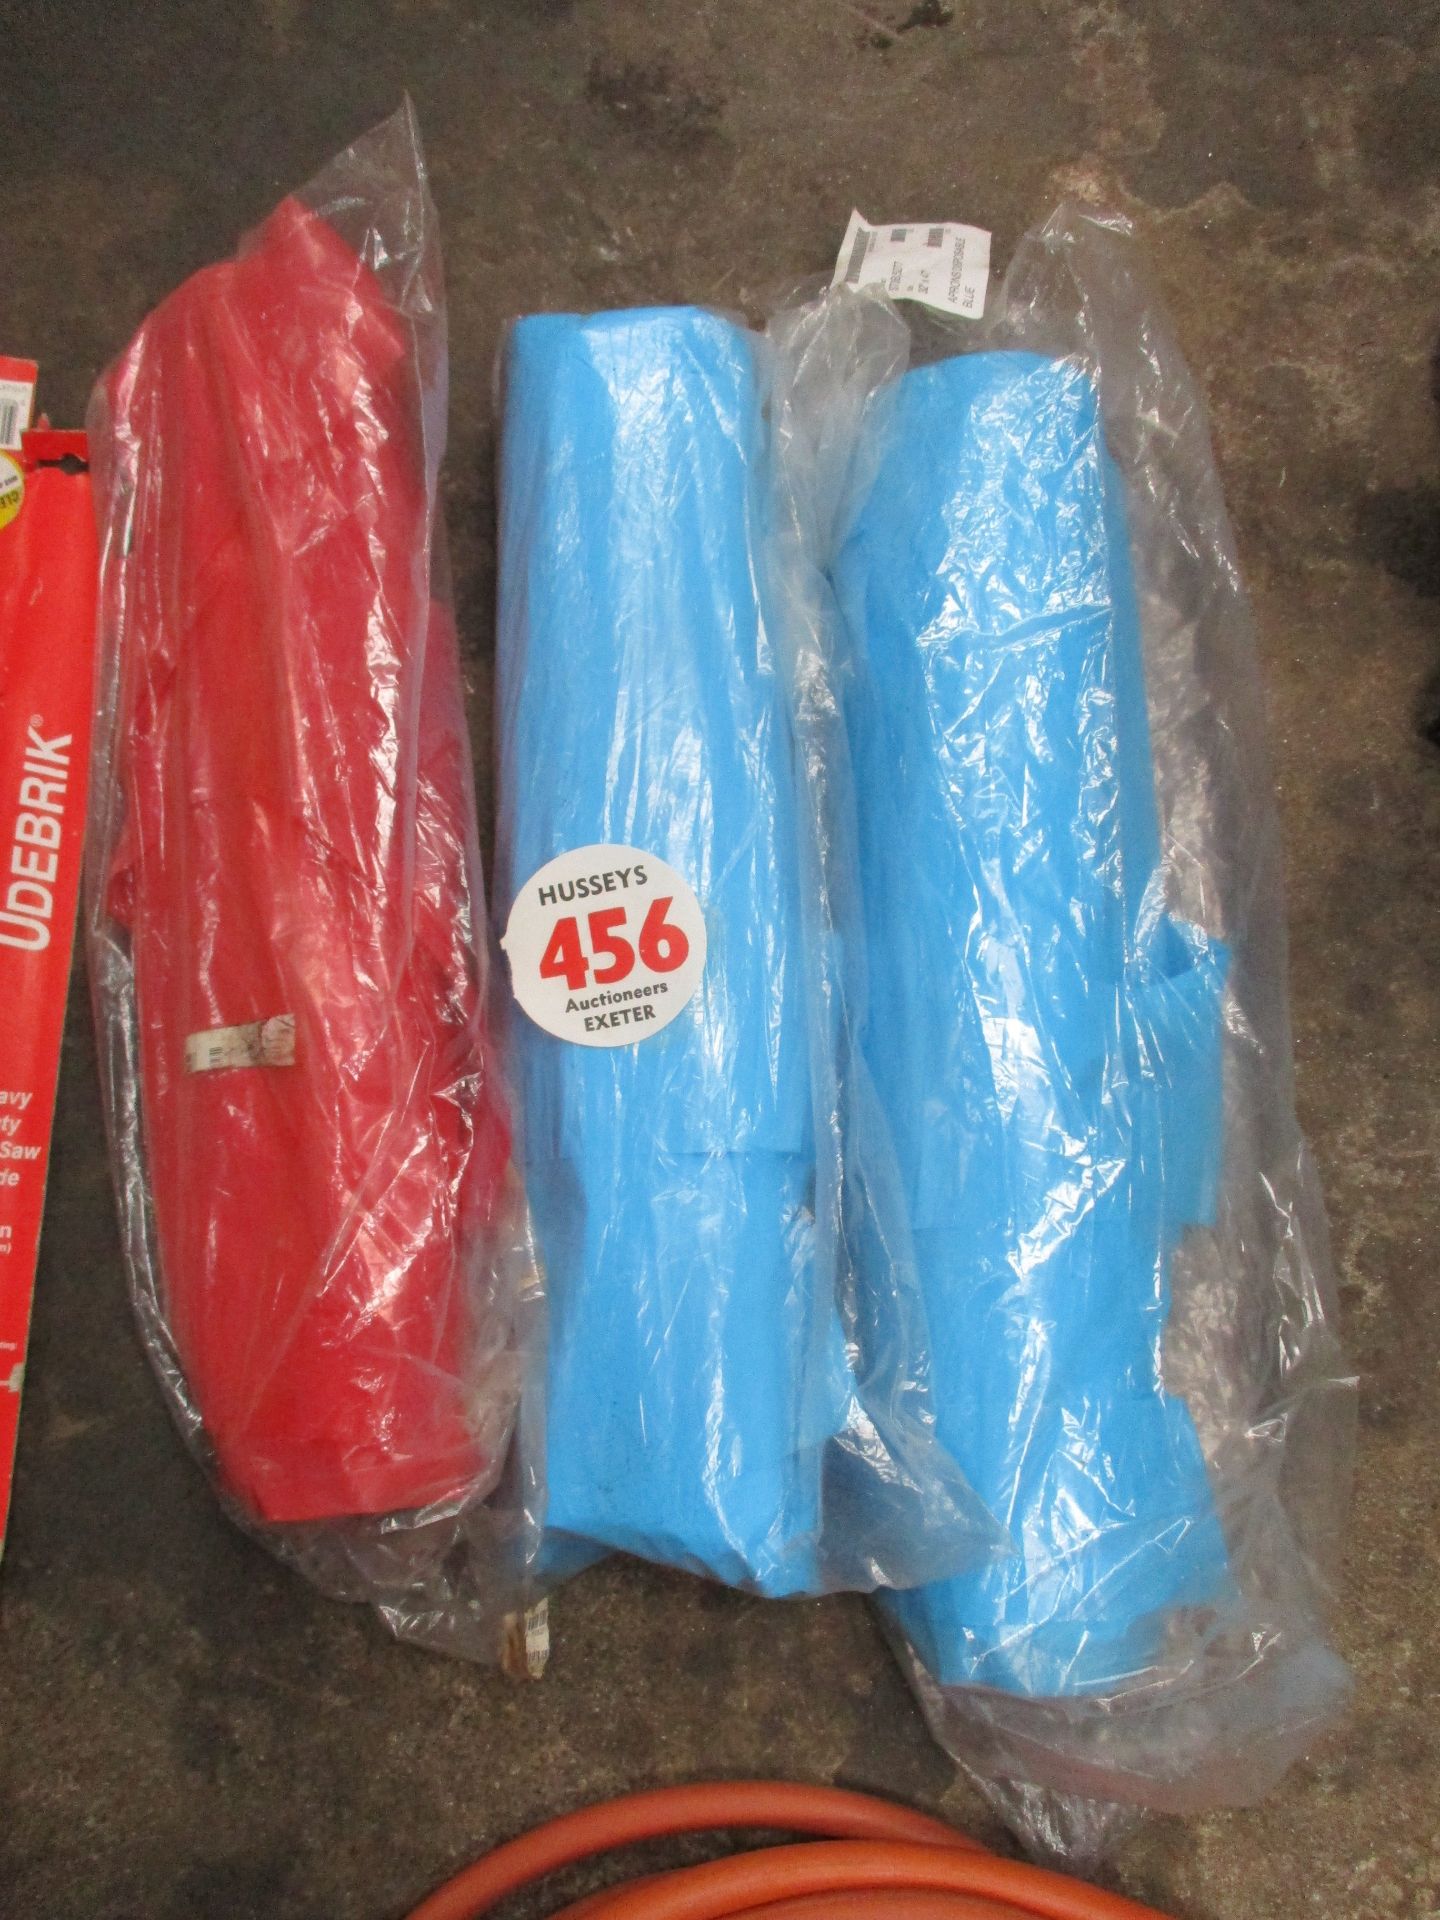 300 DISPOSABLE APRONS (200 BLUE & 100 RED)